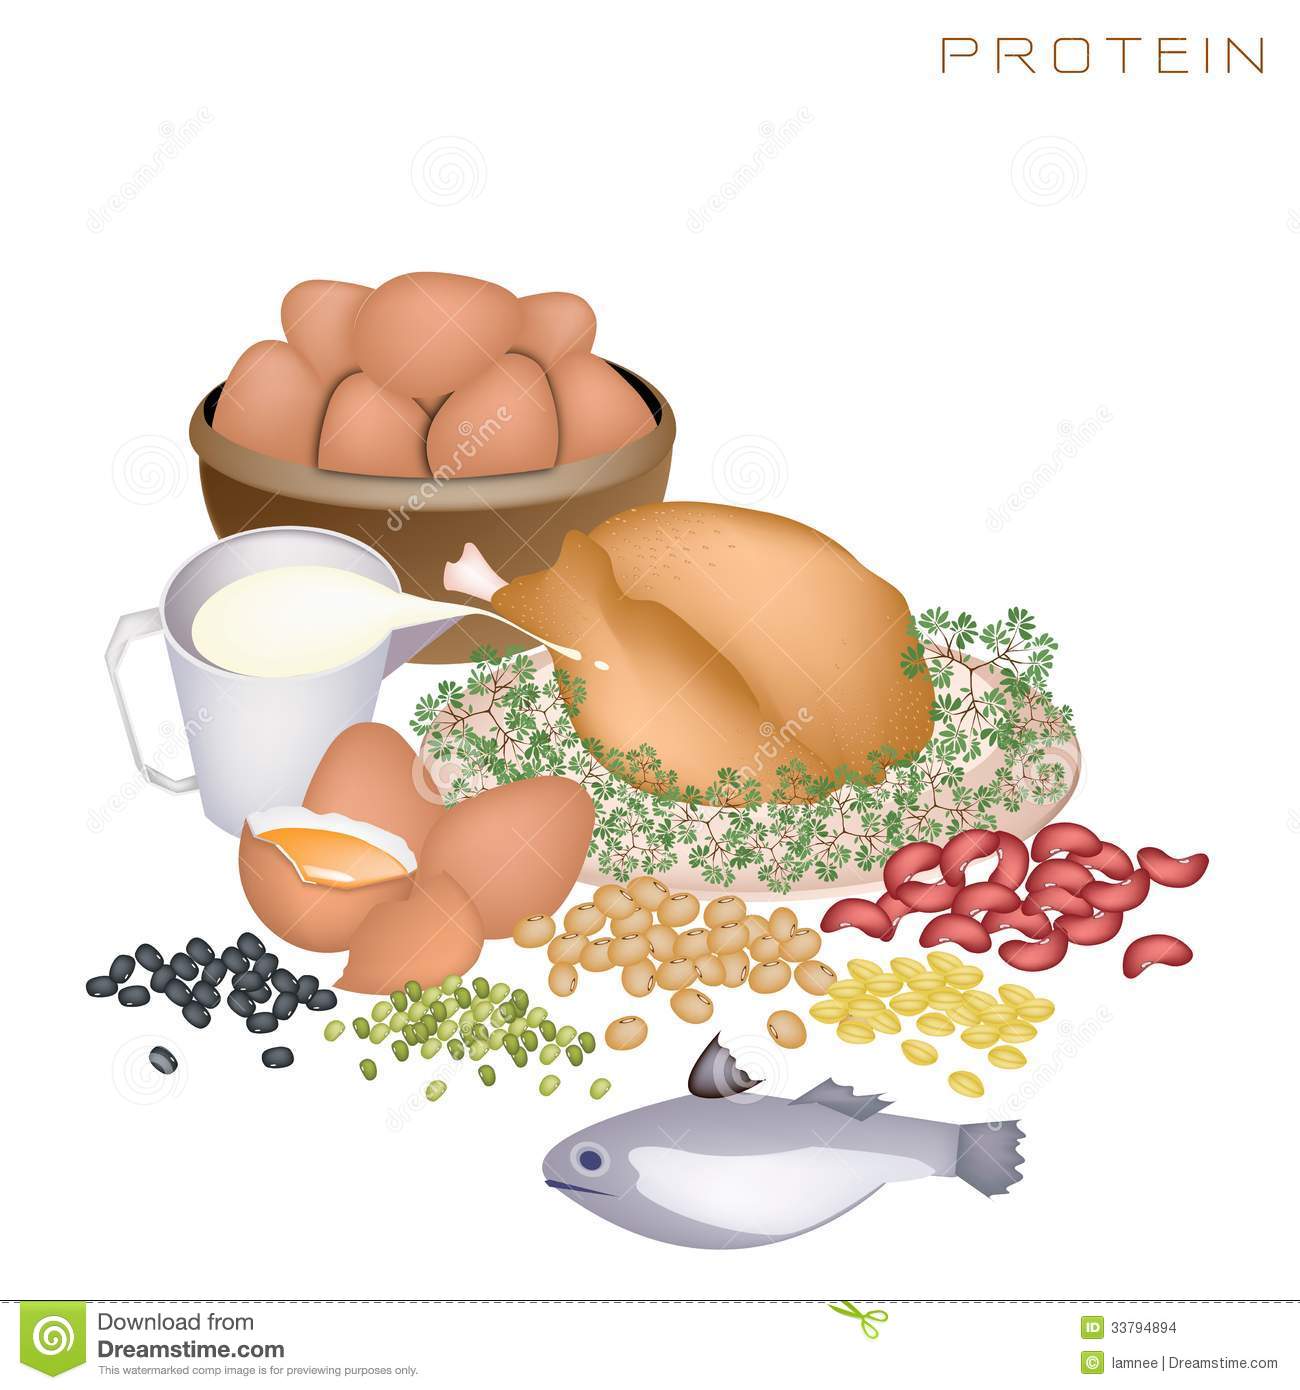 Protein Foods To Improve Nutrient Intake And Health Benefits Protein